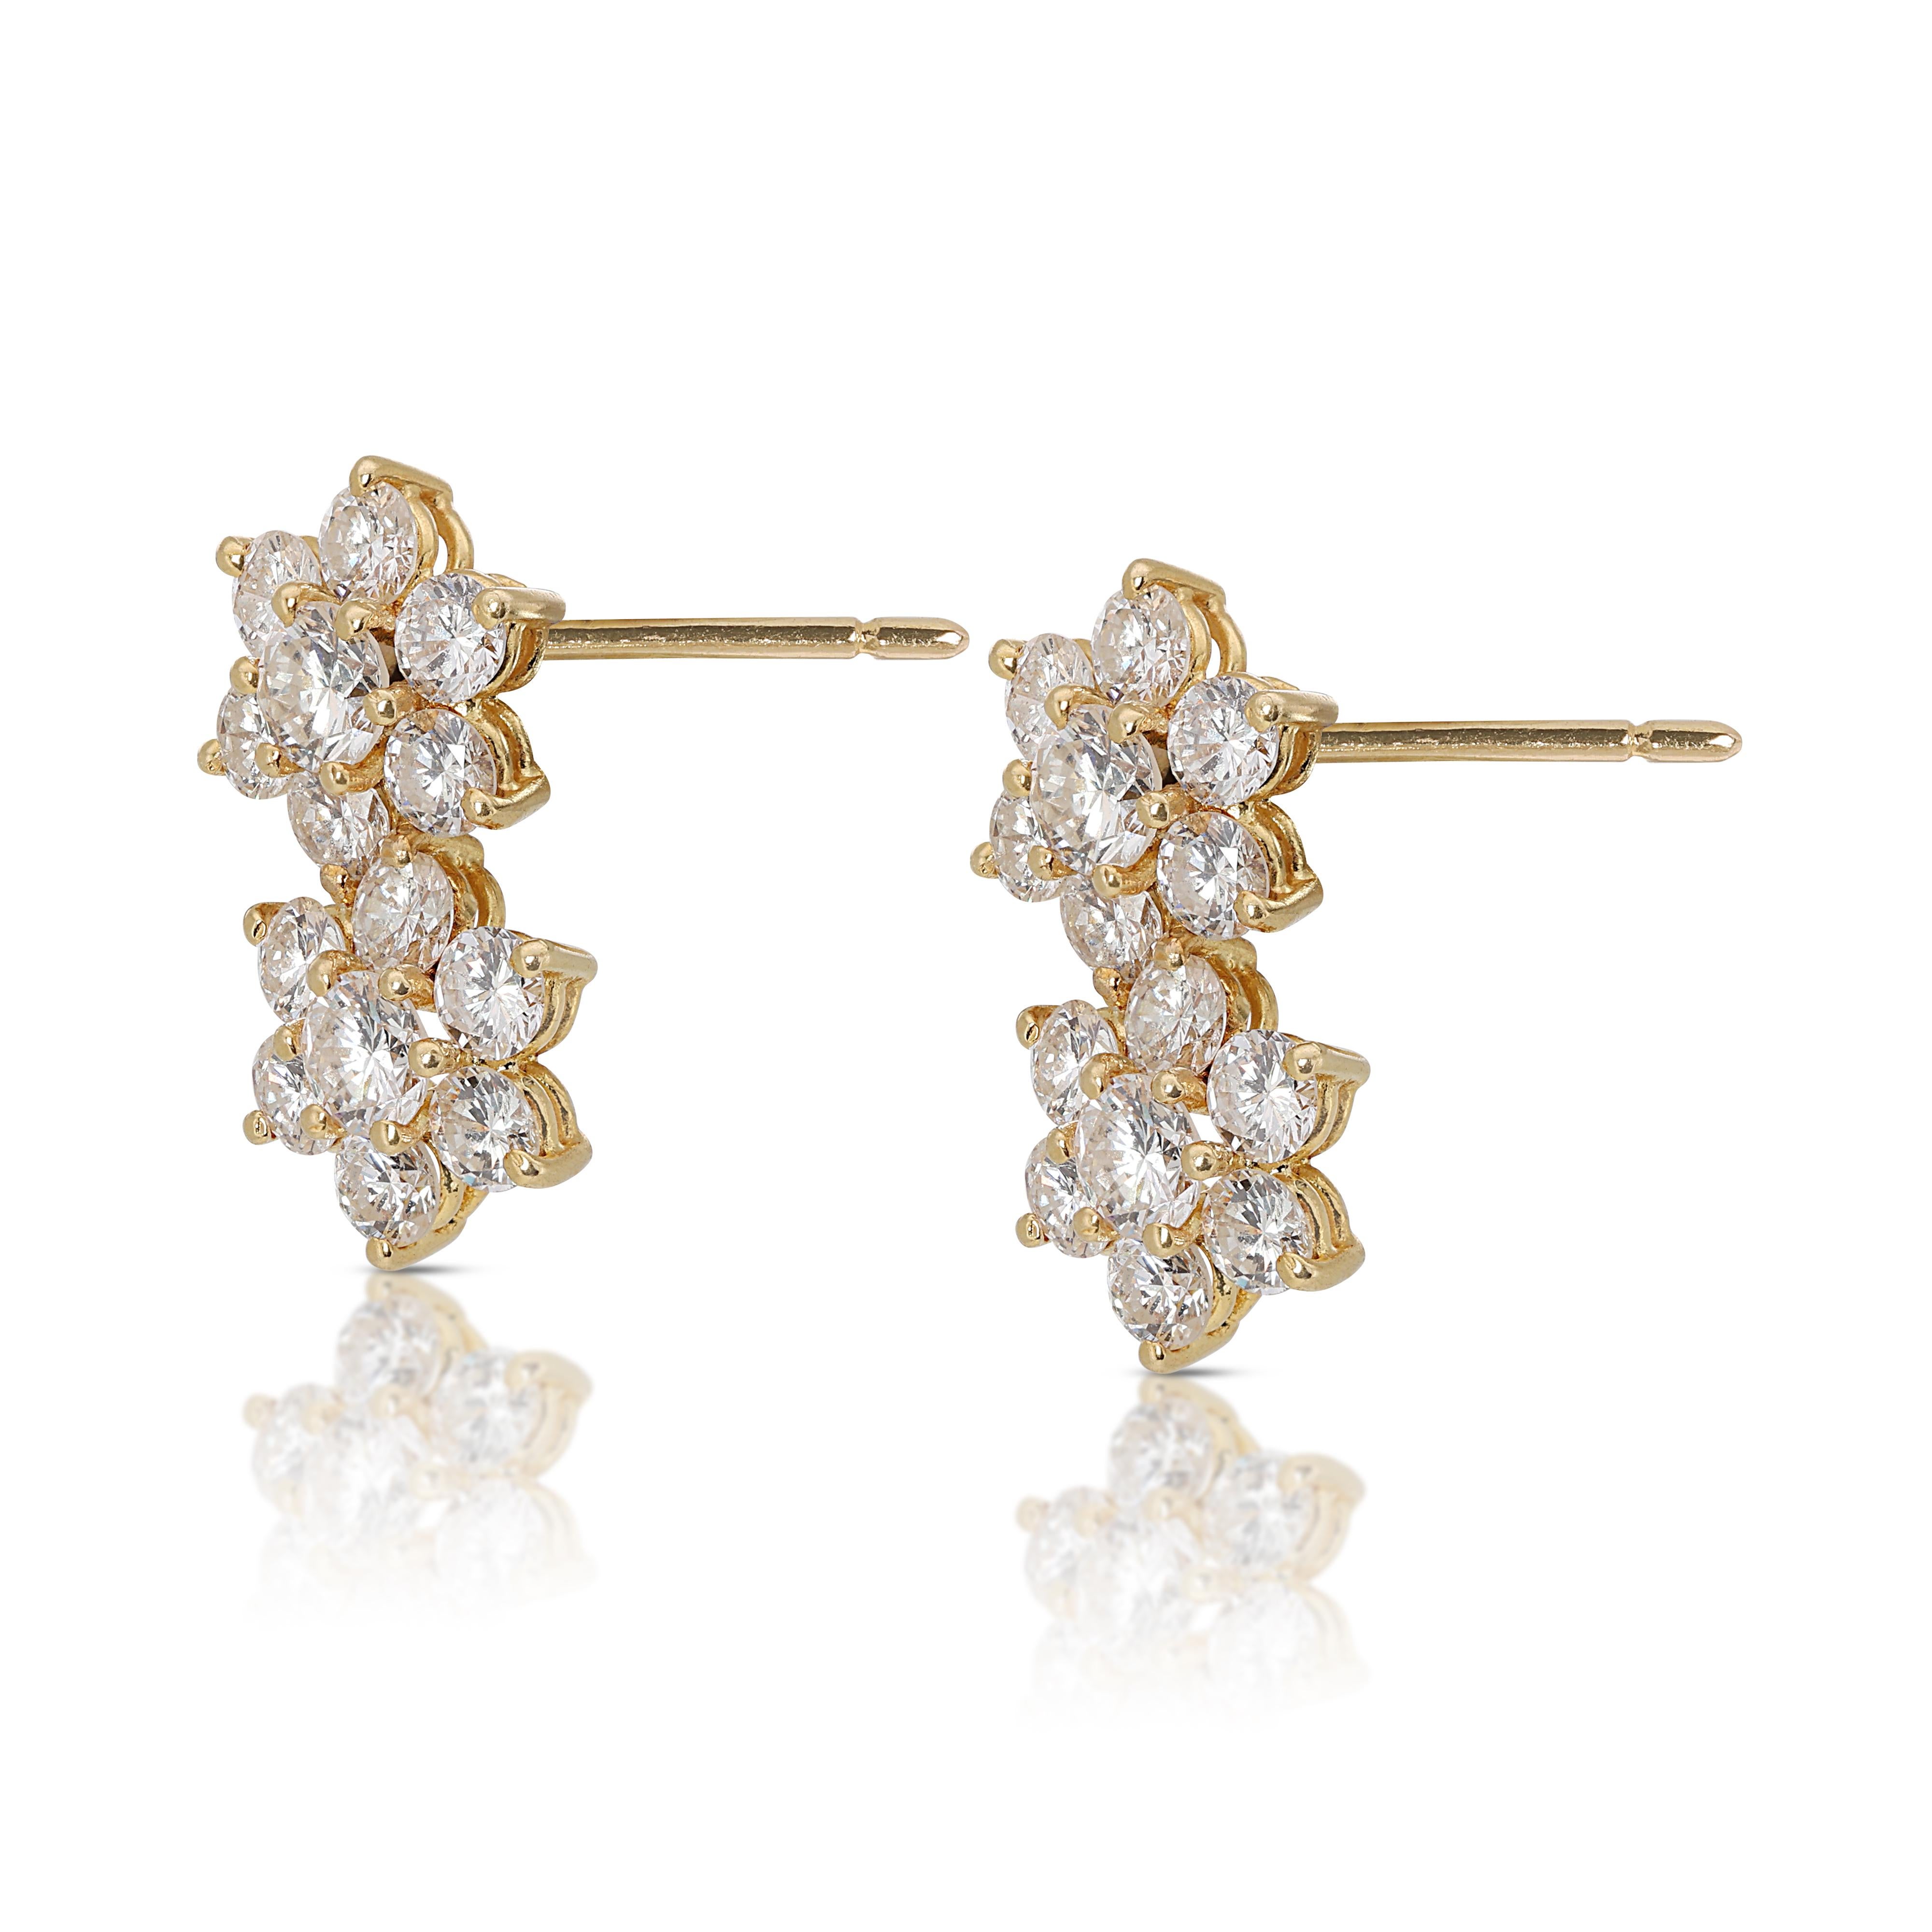 Round Cut Stunning 1.52ct Diamonds Stud Earrings in 18K Yellow Gold For Sale